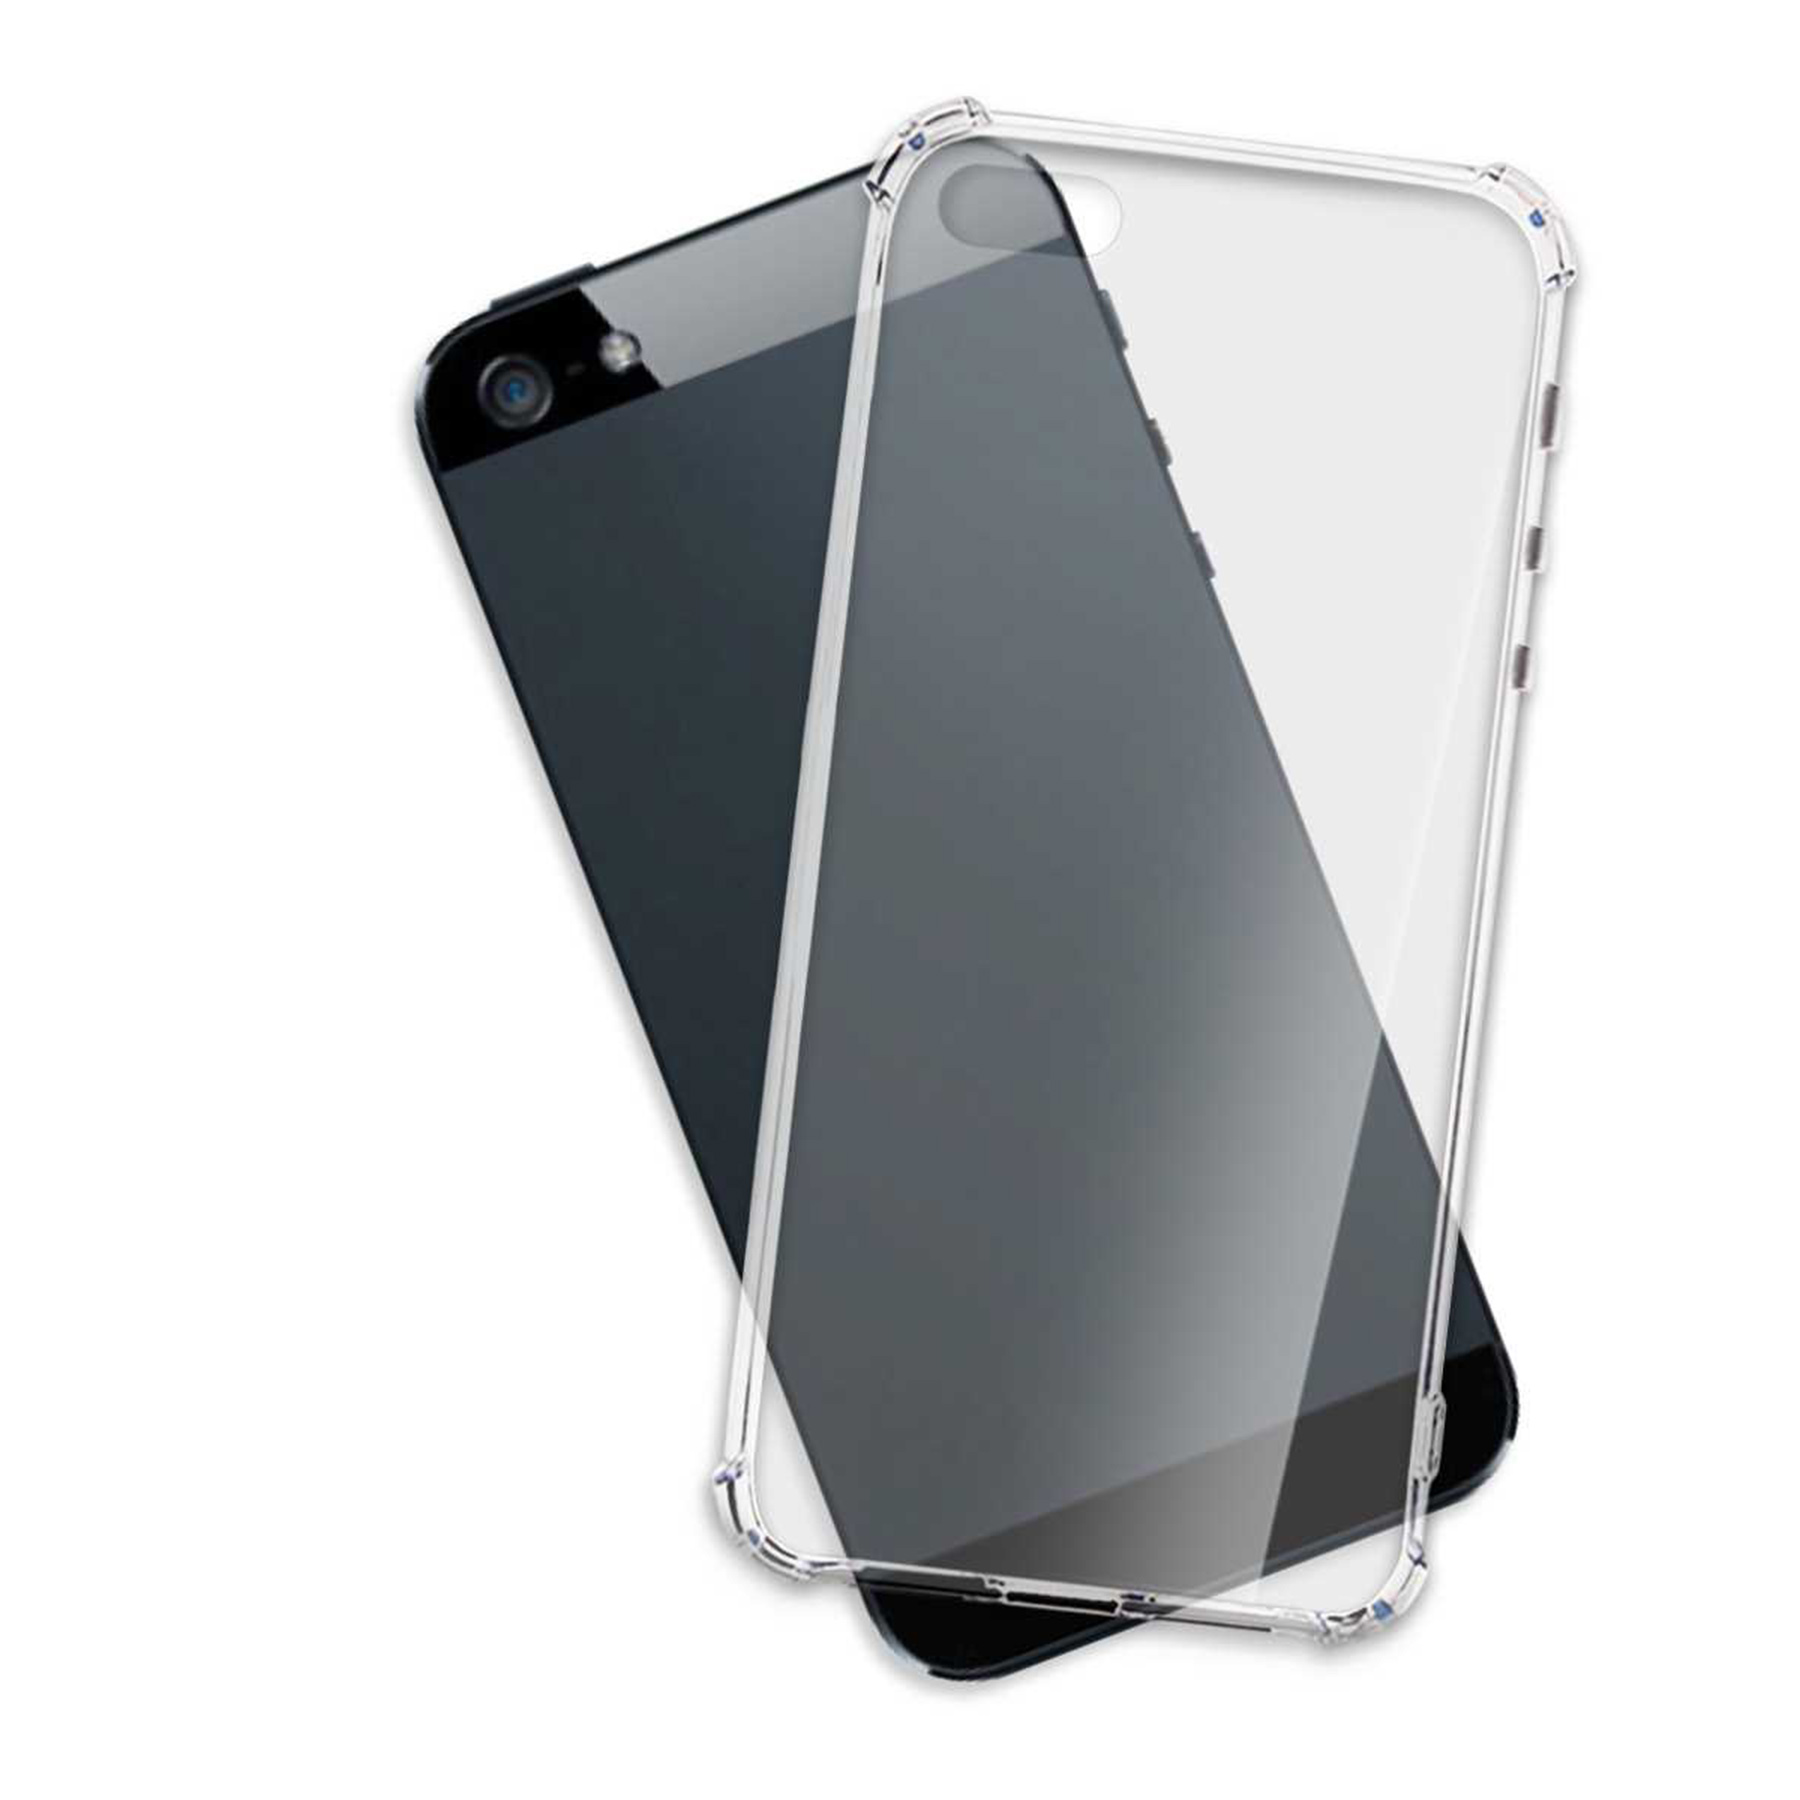 iPhone SE, Case, Clear Backcover, Armor MORE Apple, iPhone Transparent 5, iPhone MTB 5s, ENERGY